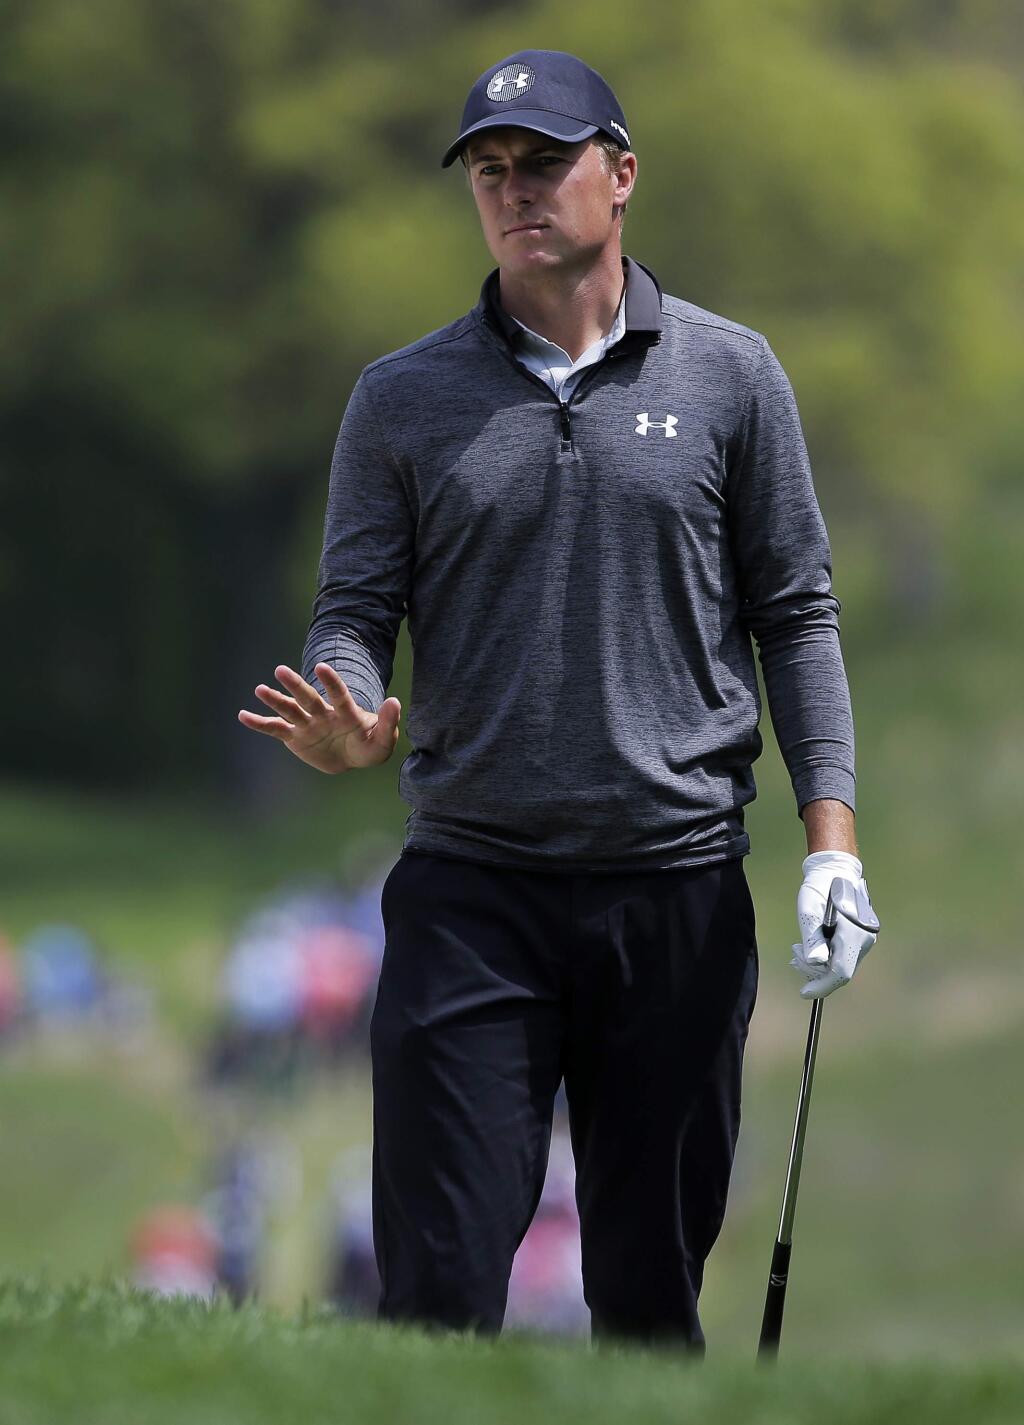 Jordan Spieth reacts after hitting out of a bunker on the third green during the second round of the PGA Championship golf tournament, Friday, May 17, 2019, at Bethpage Black in Farmingdale, N.Y. (AP Photo/Seth Wenig)